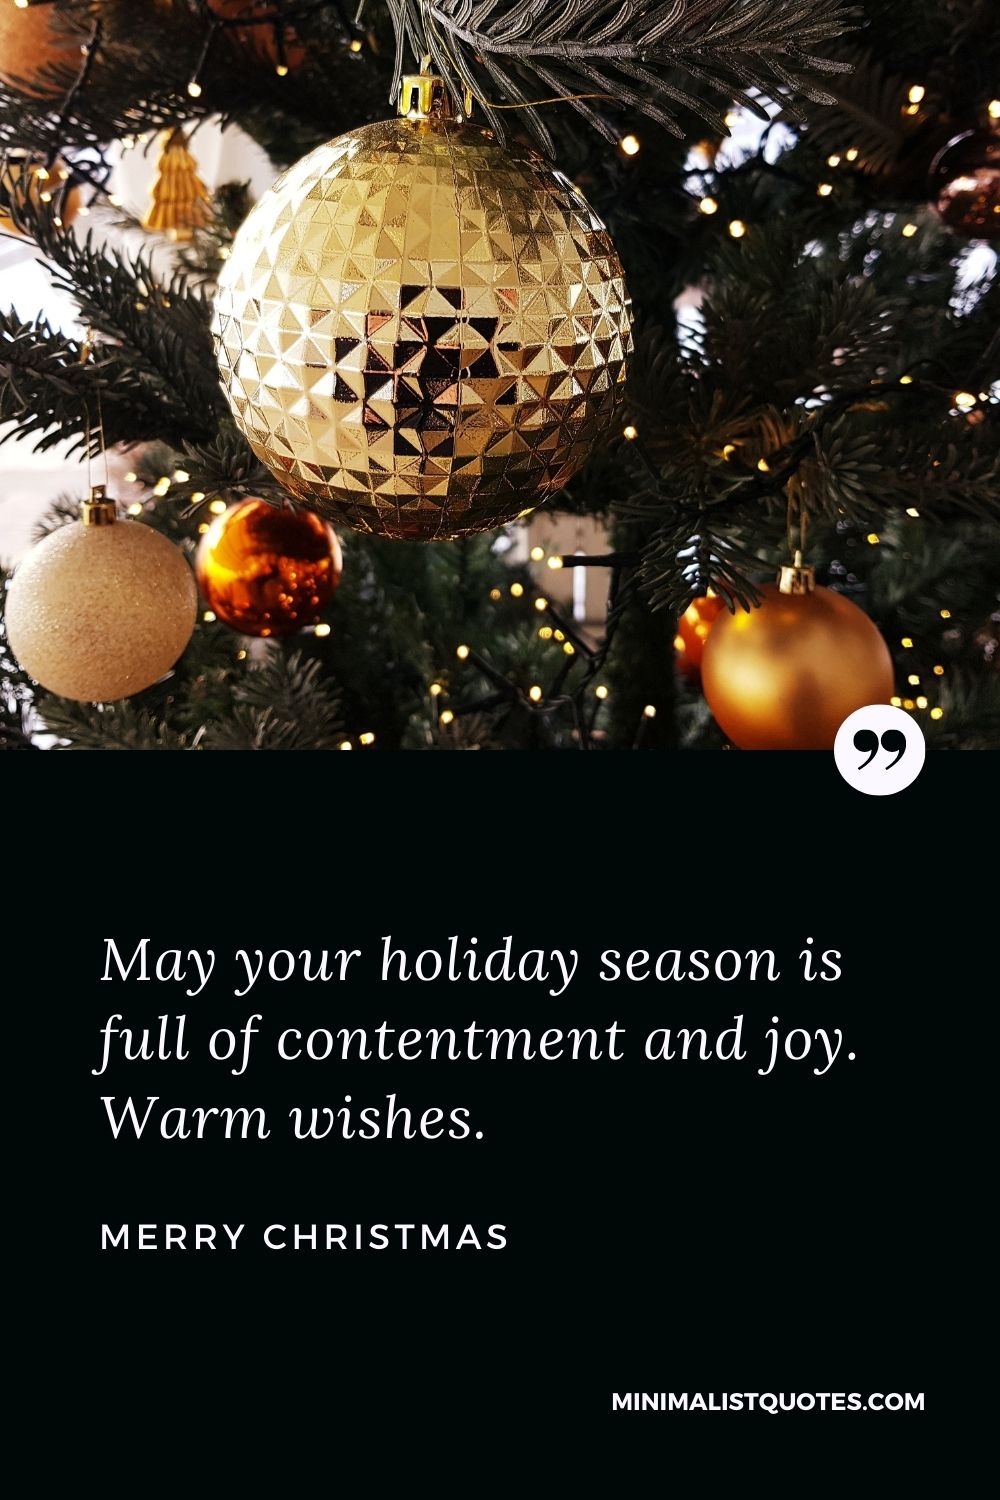 Merry Christmas Wish - May your holiday season is full of contentment and joy. Warm wishes.